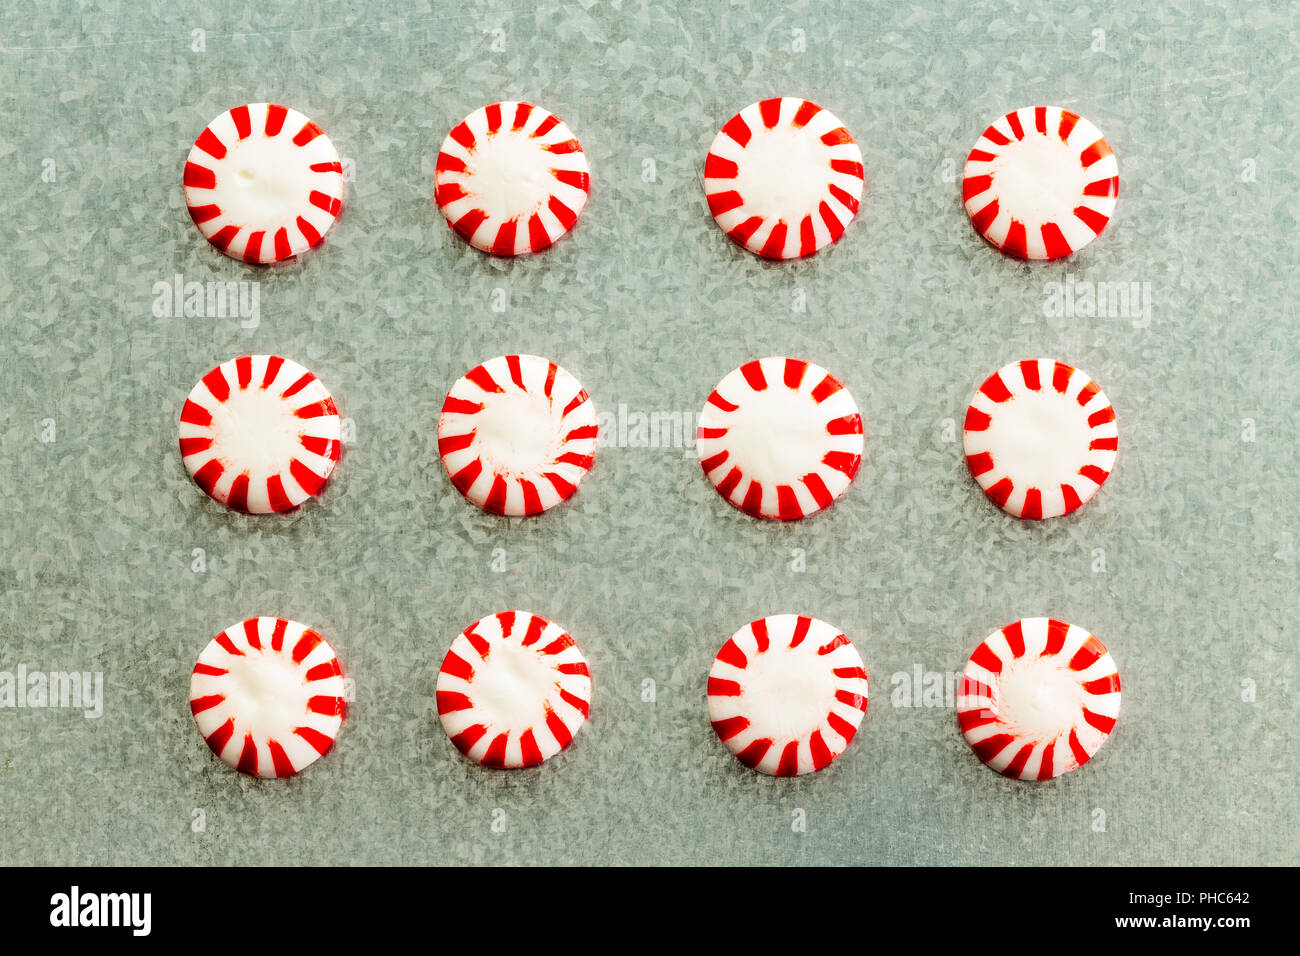 Arrangement of colorful red and white striped peppermint flavored starlight candy in neat rows on a textured grey background viewed from above in a fl Stock Photo